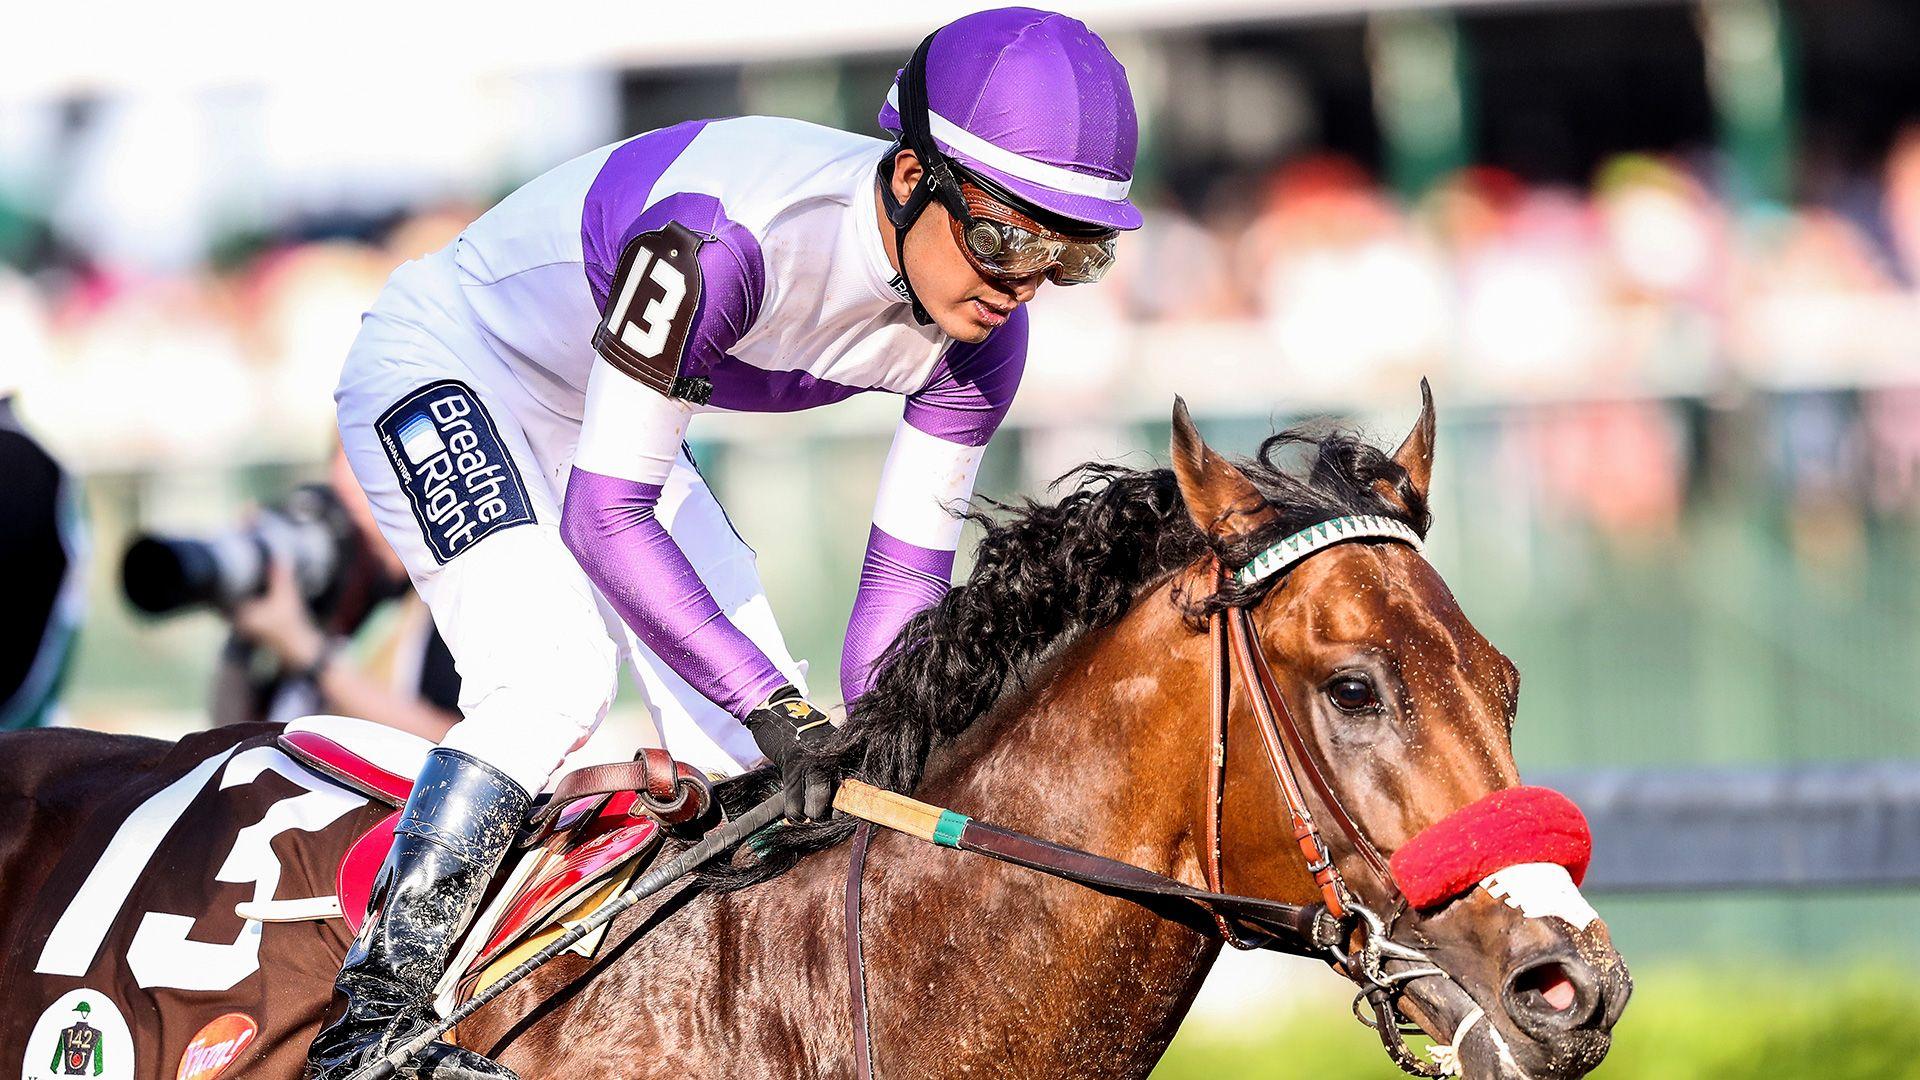 Kentucky Derby 2016 winning horse: Six things you need to know about